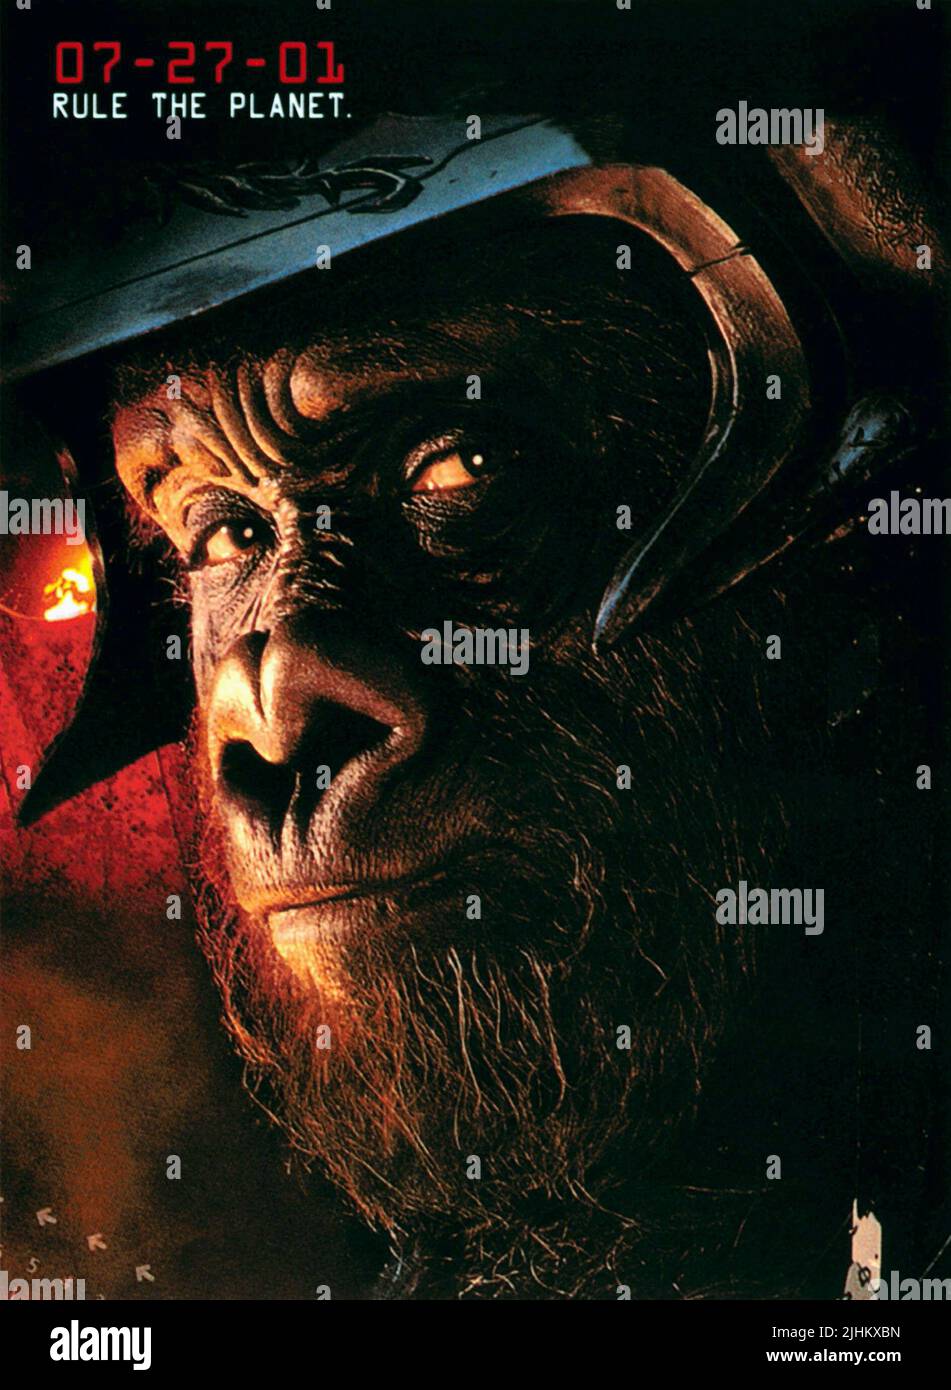 MICHAEL CLARKE DUNCAN POSTER, PLANET OF THE APES, 2001 Stock Photo